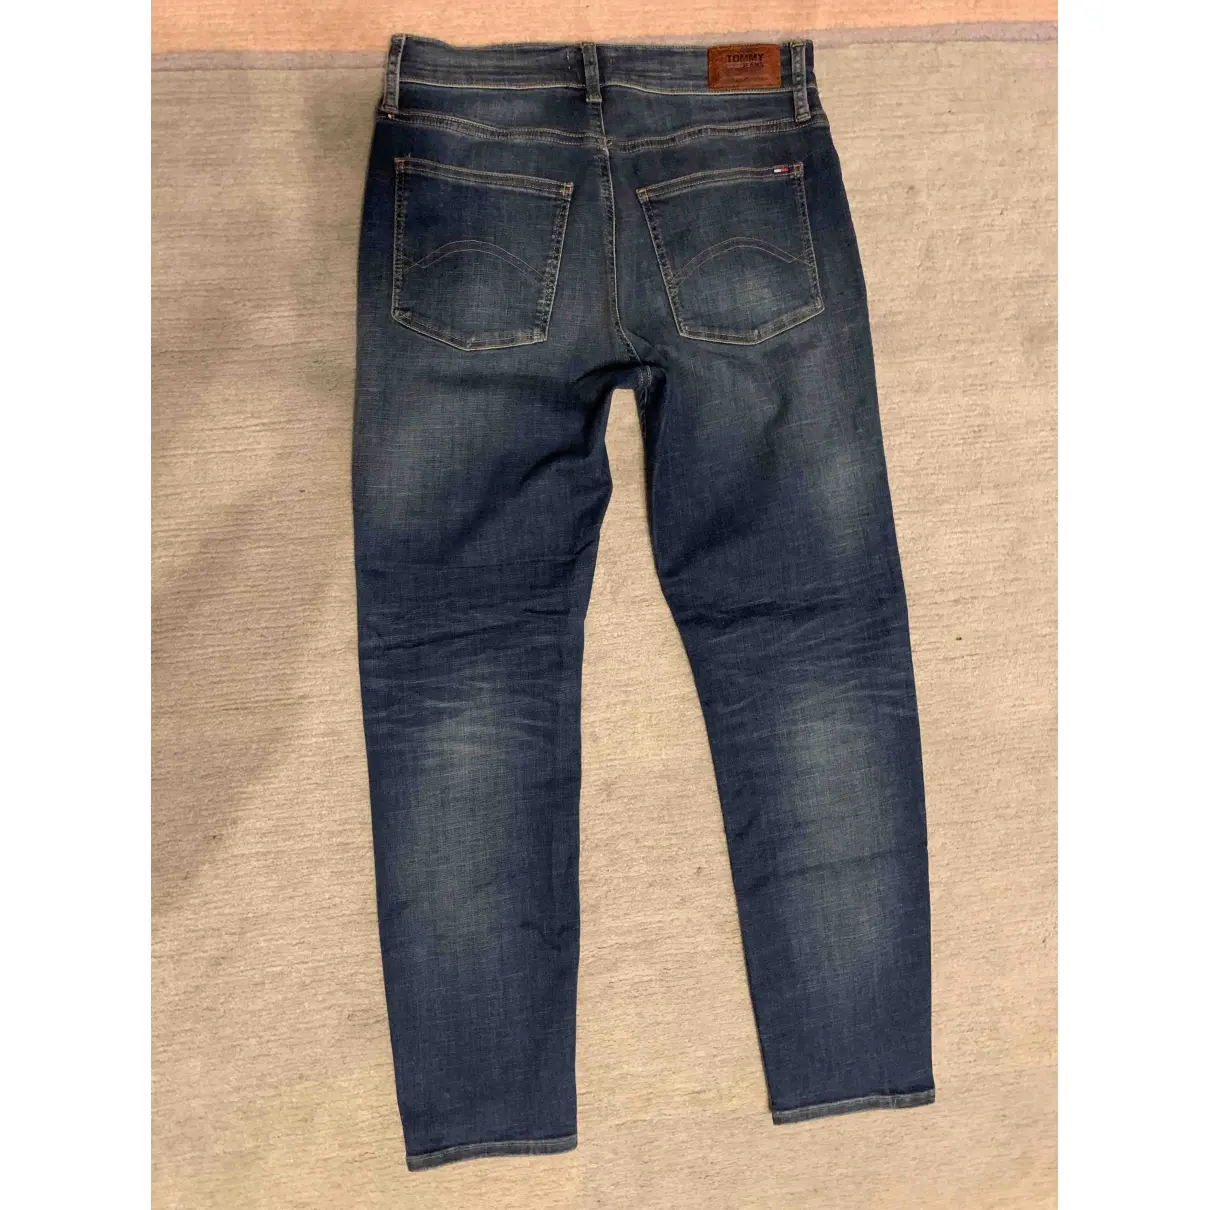 Buy Tommy Jeans Straight jeans online